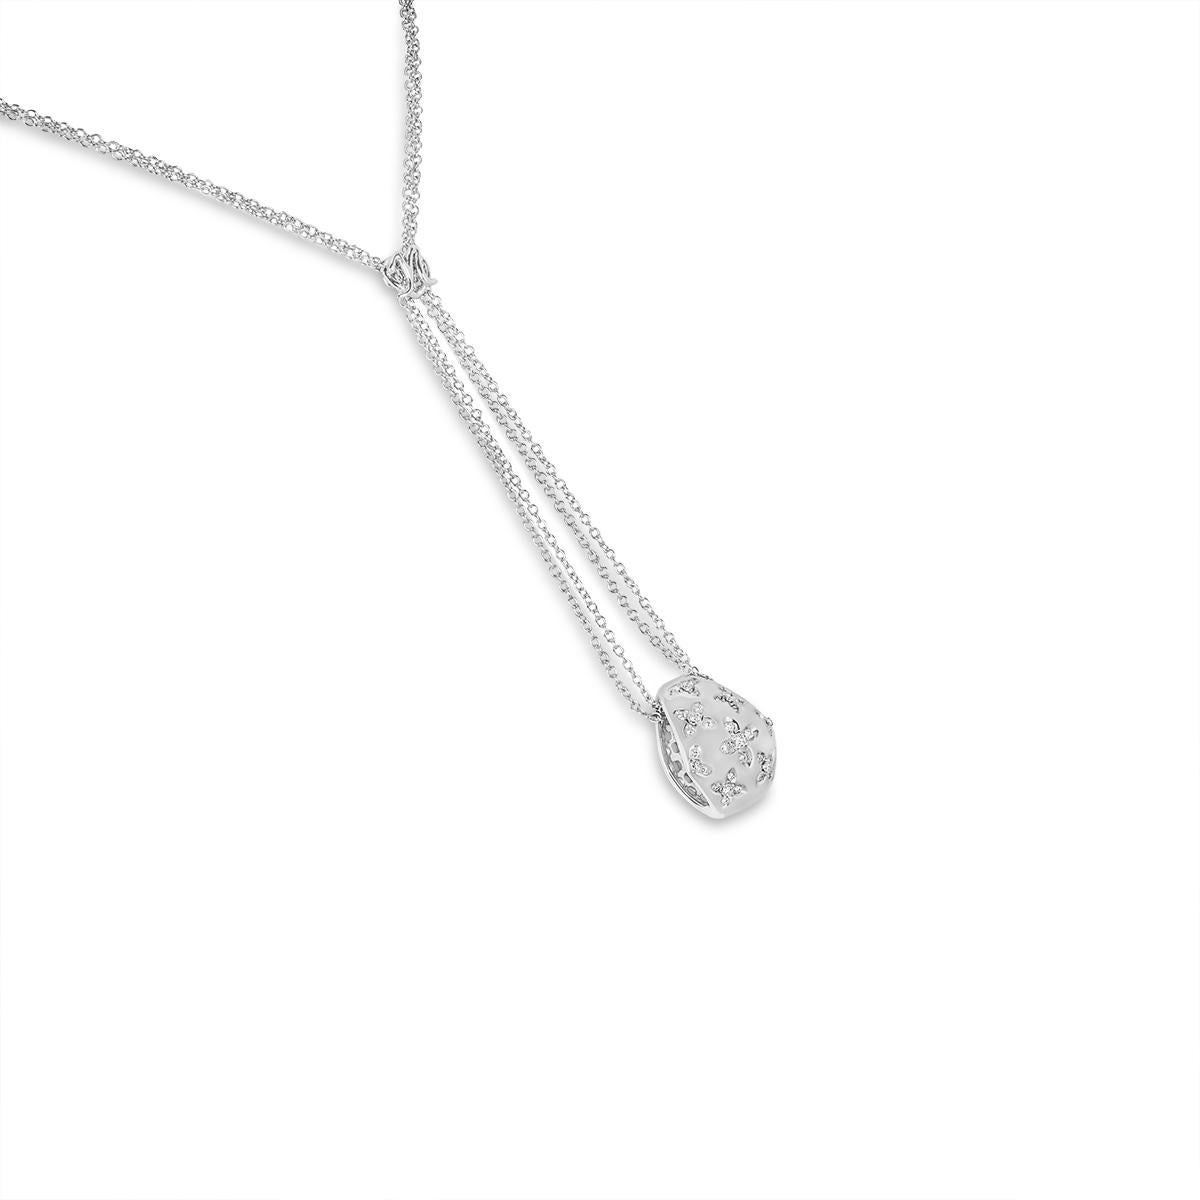 A lovely 18k white gold diamond pendant. The necklace consists of a cursive style letter 'N' set above a floral pattern diamond set pendant. The 35 round brilliant cut diamonds have an approximate total weight of 0.72ct, G-H colour and VS-SI